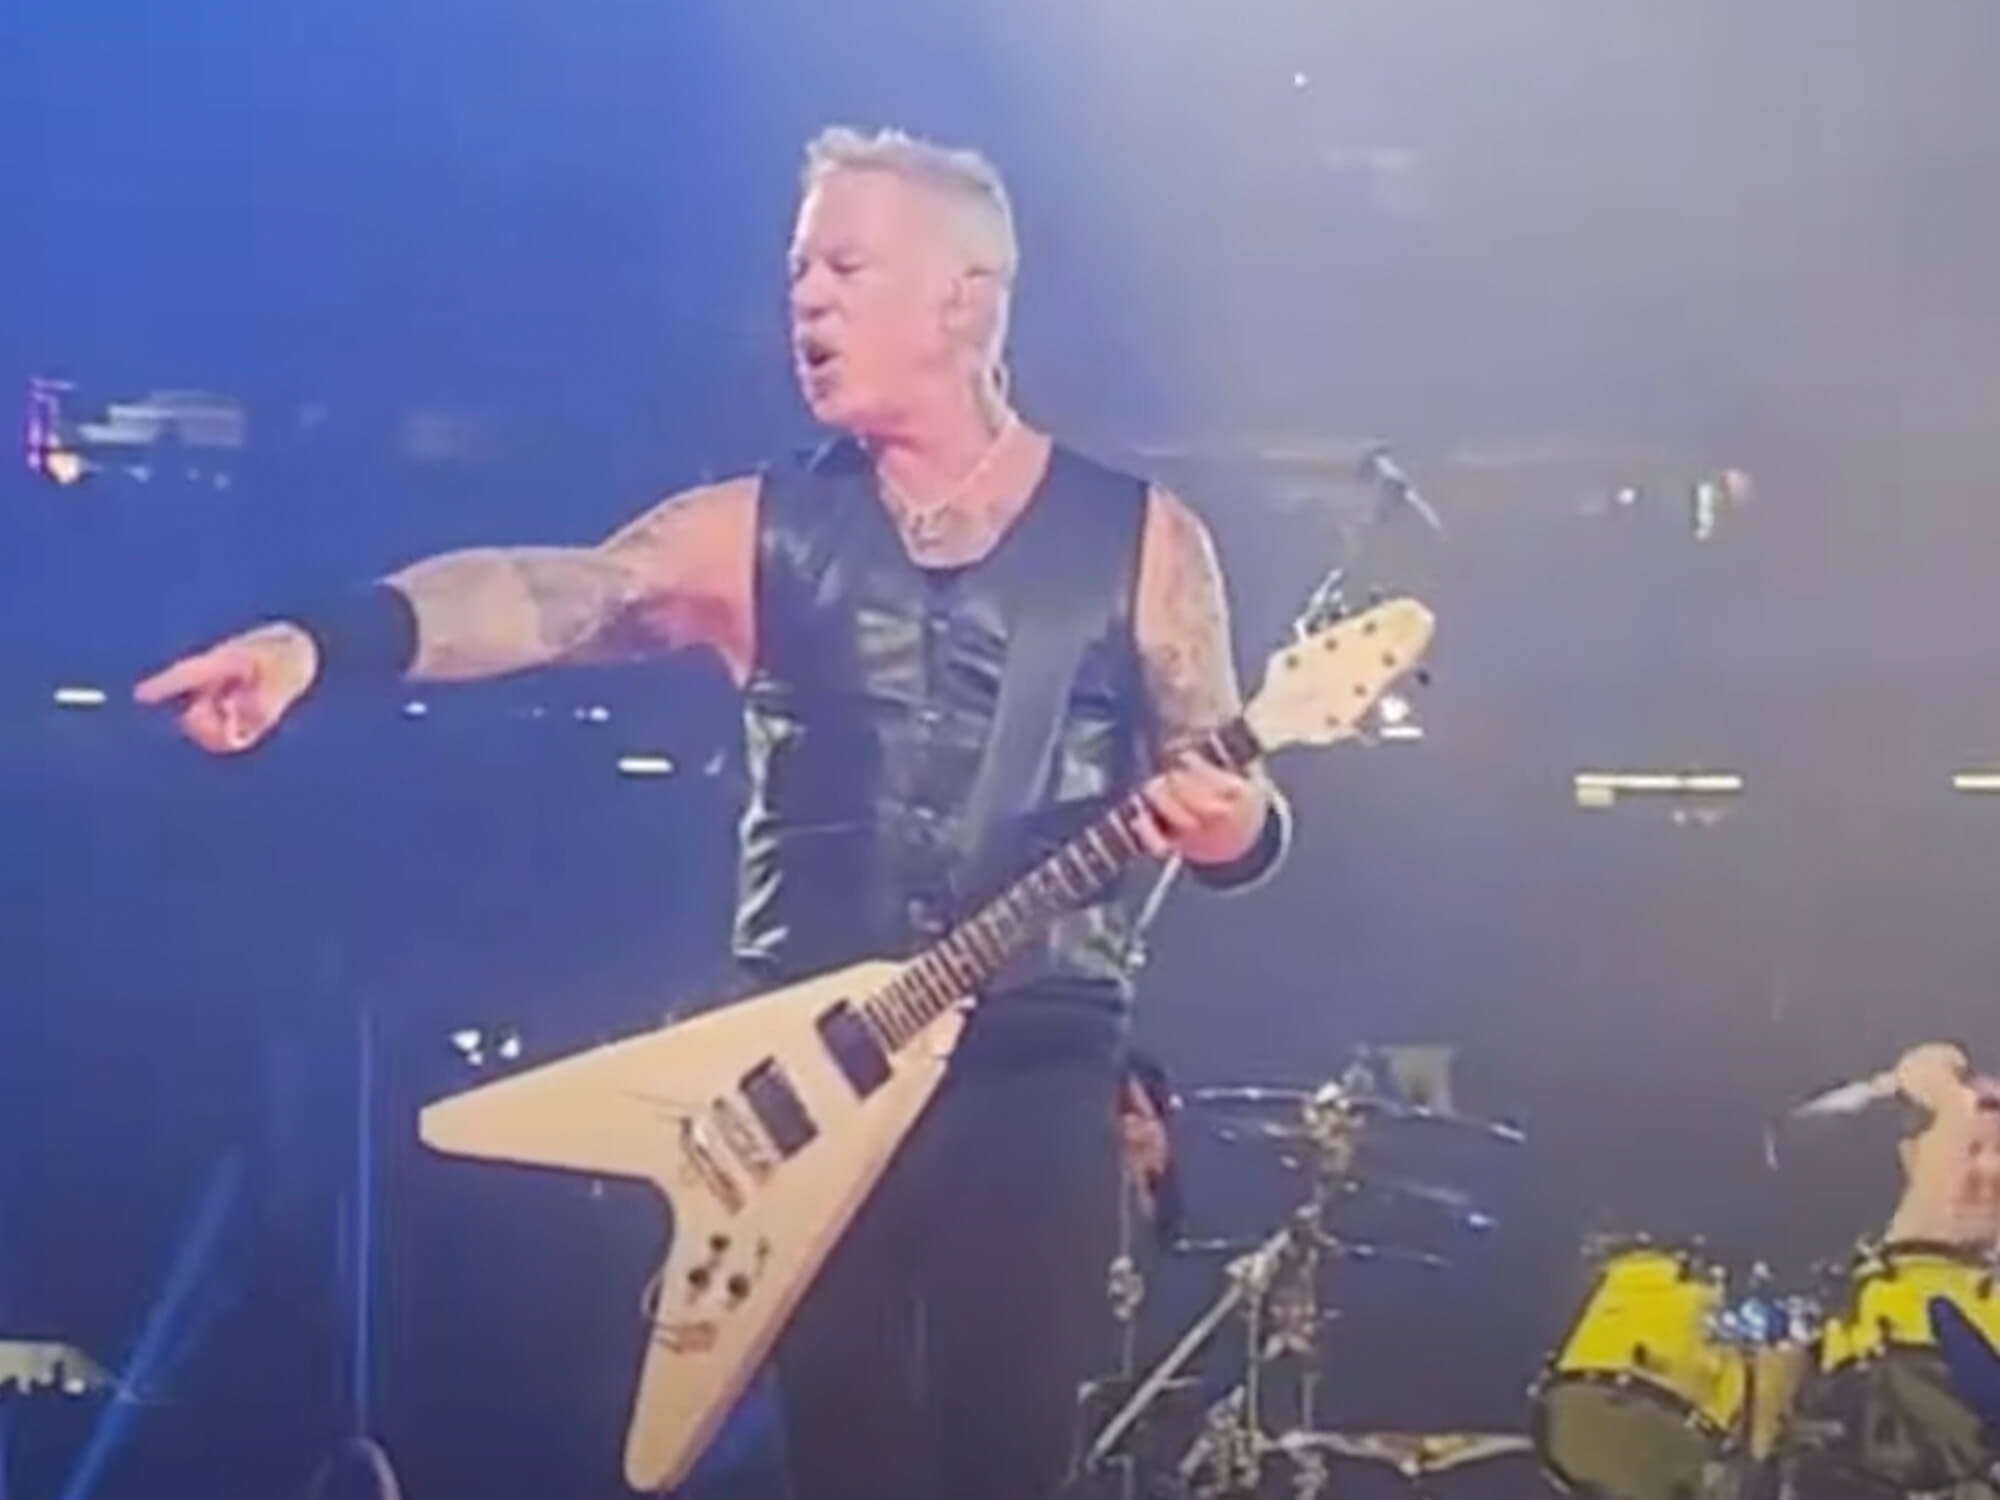 James Hetfield playing his white Gibson Flying V. He's pointing into the crowd with a stern expression.